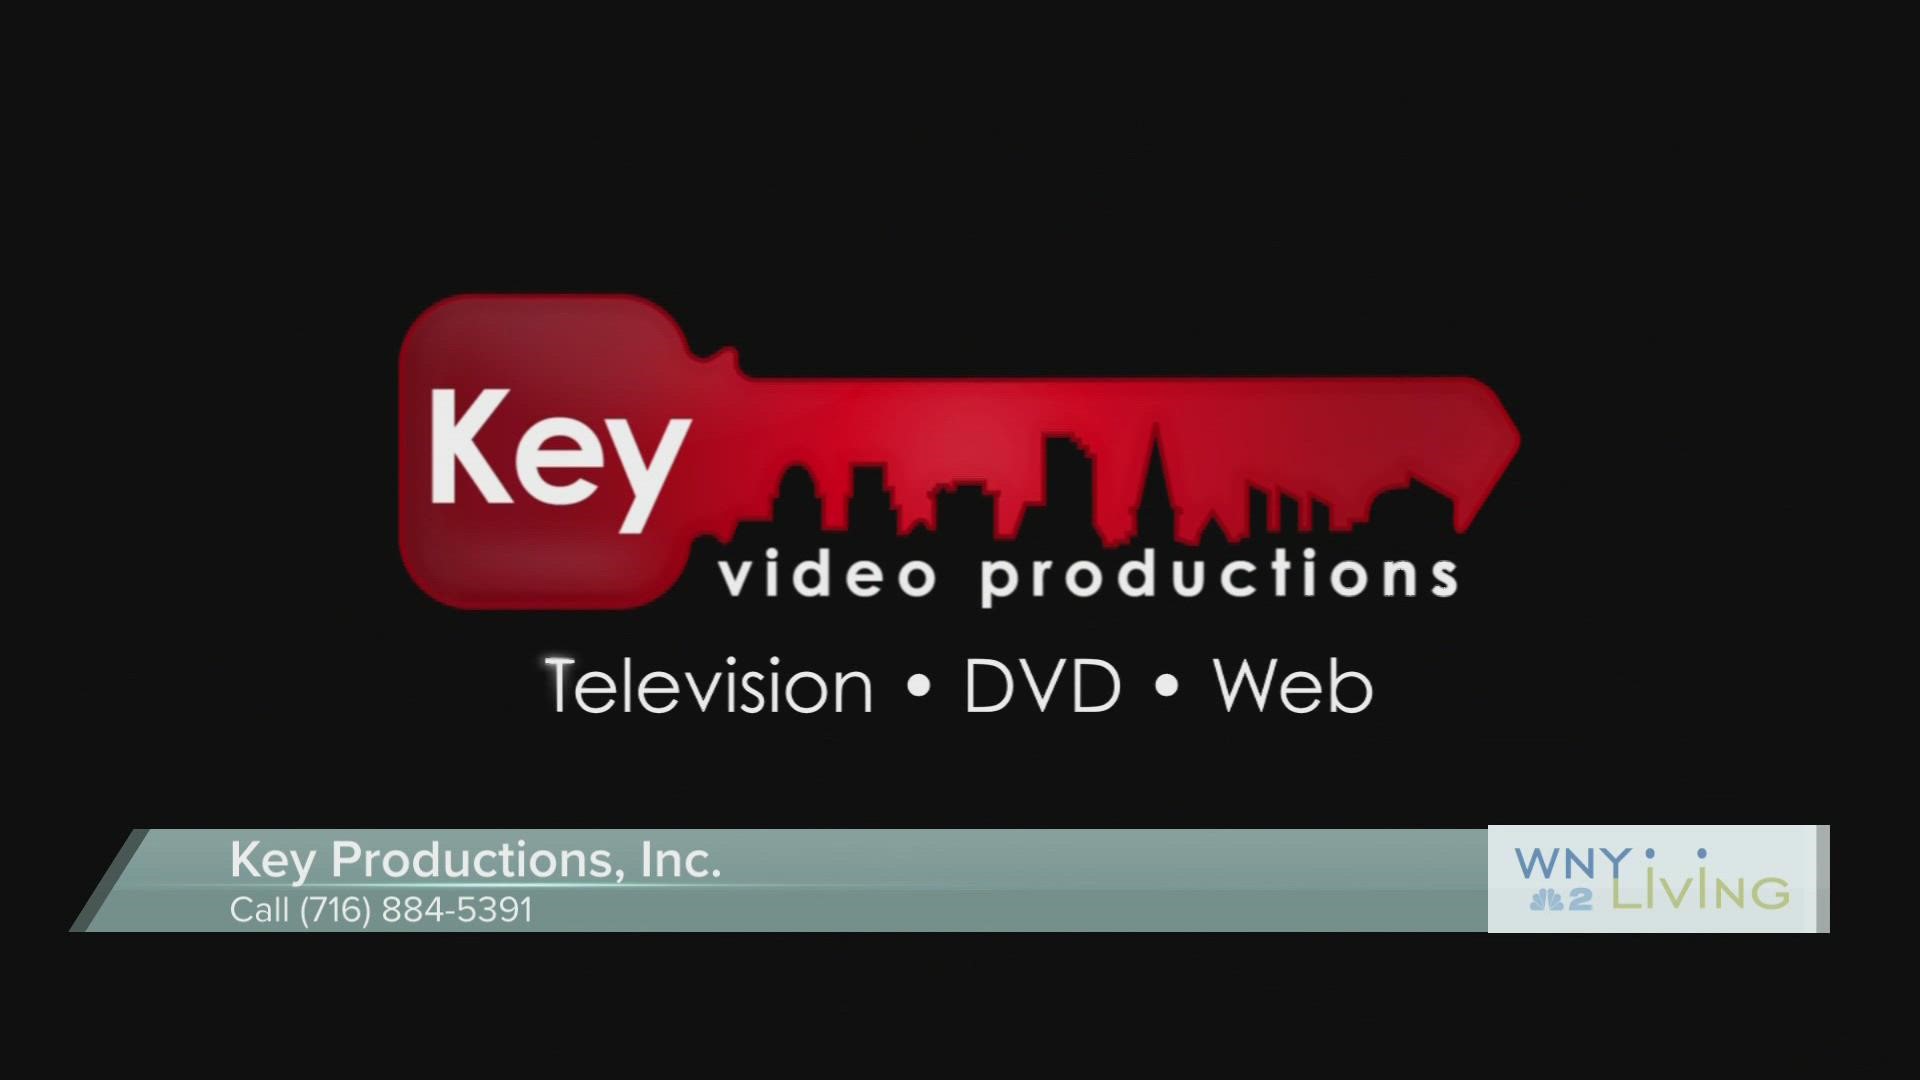 WNY Living - August 6 - Key Productions, Inc. (THIS VIDEO IS SPONSORED BY KEY PRODUCTIONS, INC.)